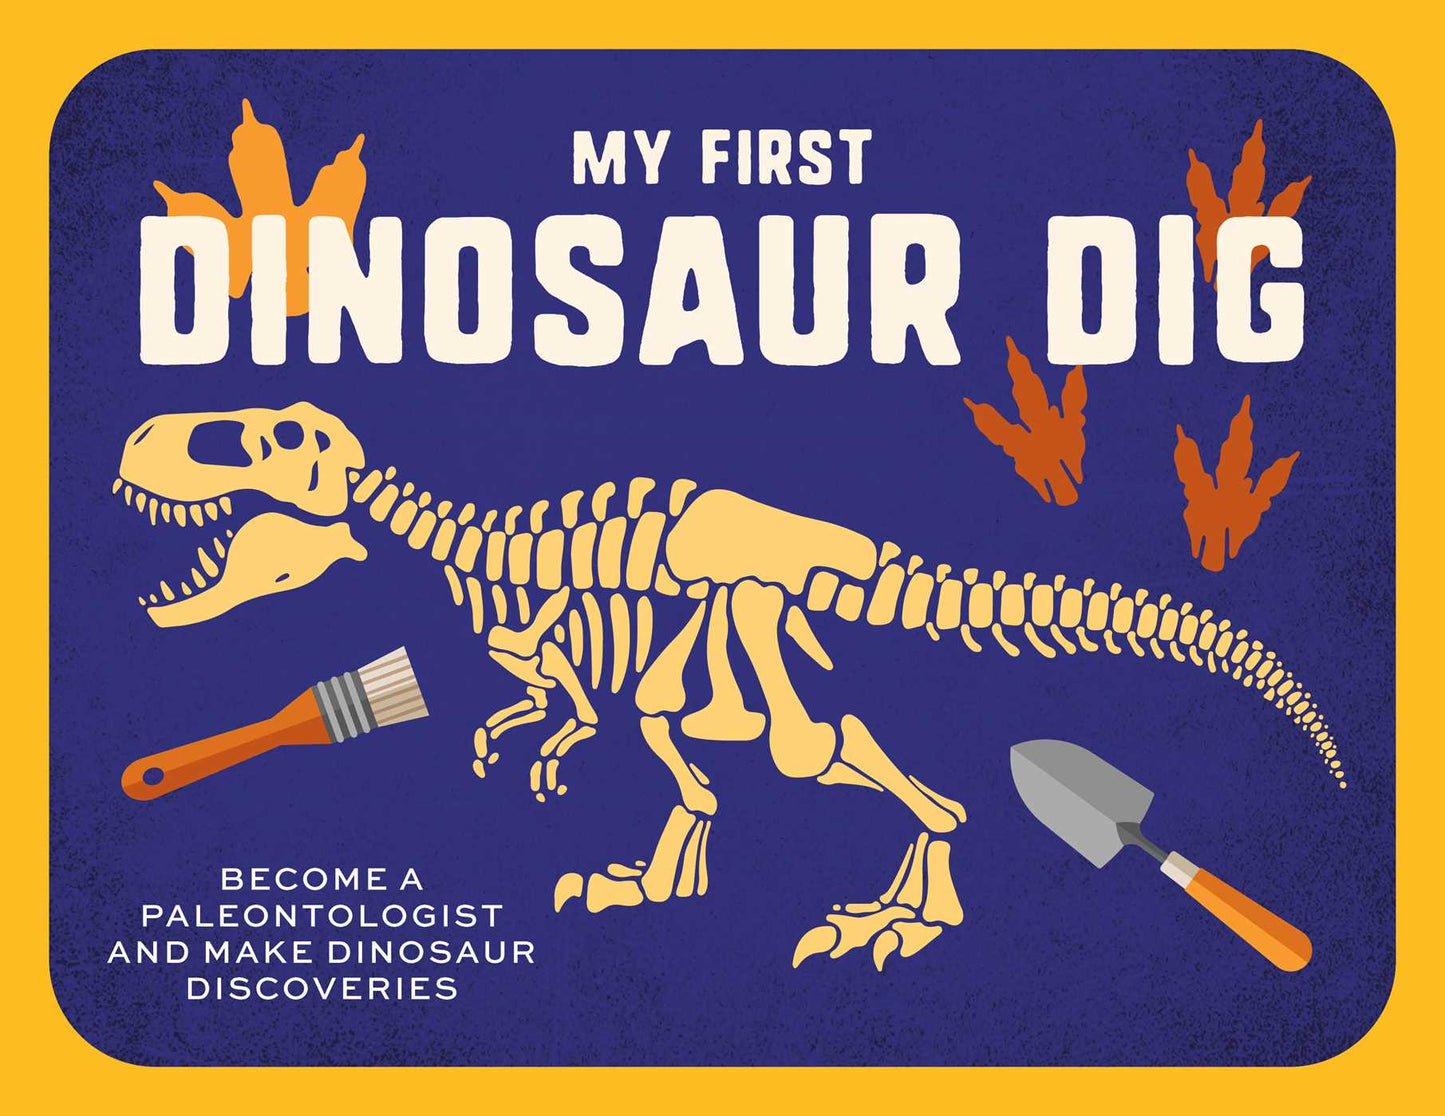 My First Dinosaur Dig: Let's Go Fossil Hunting!